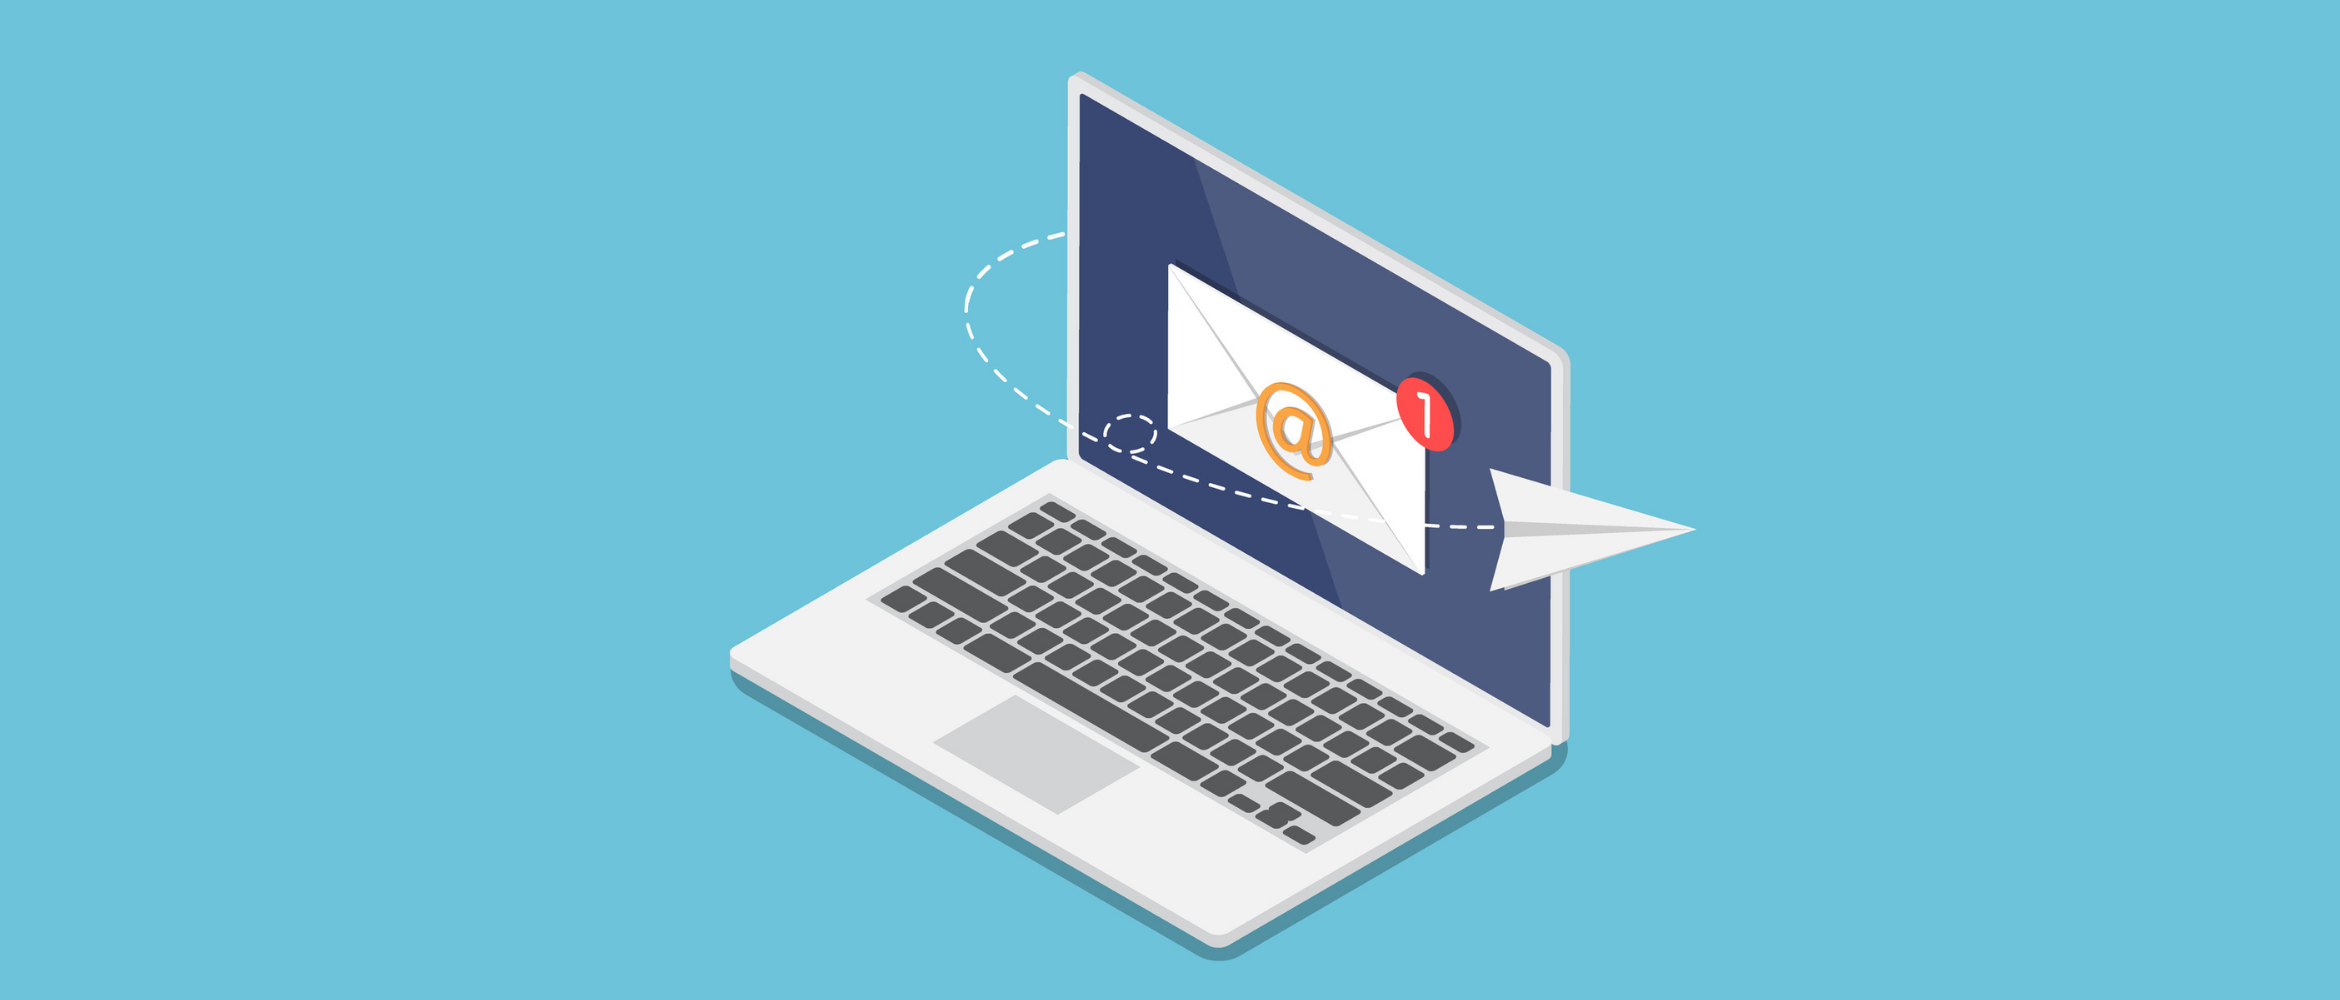 Gửi chiến dịch email 